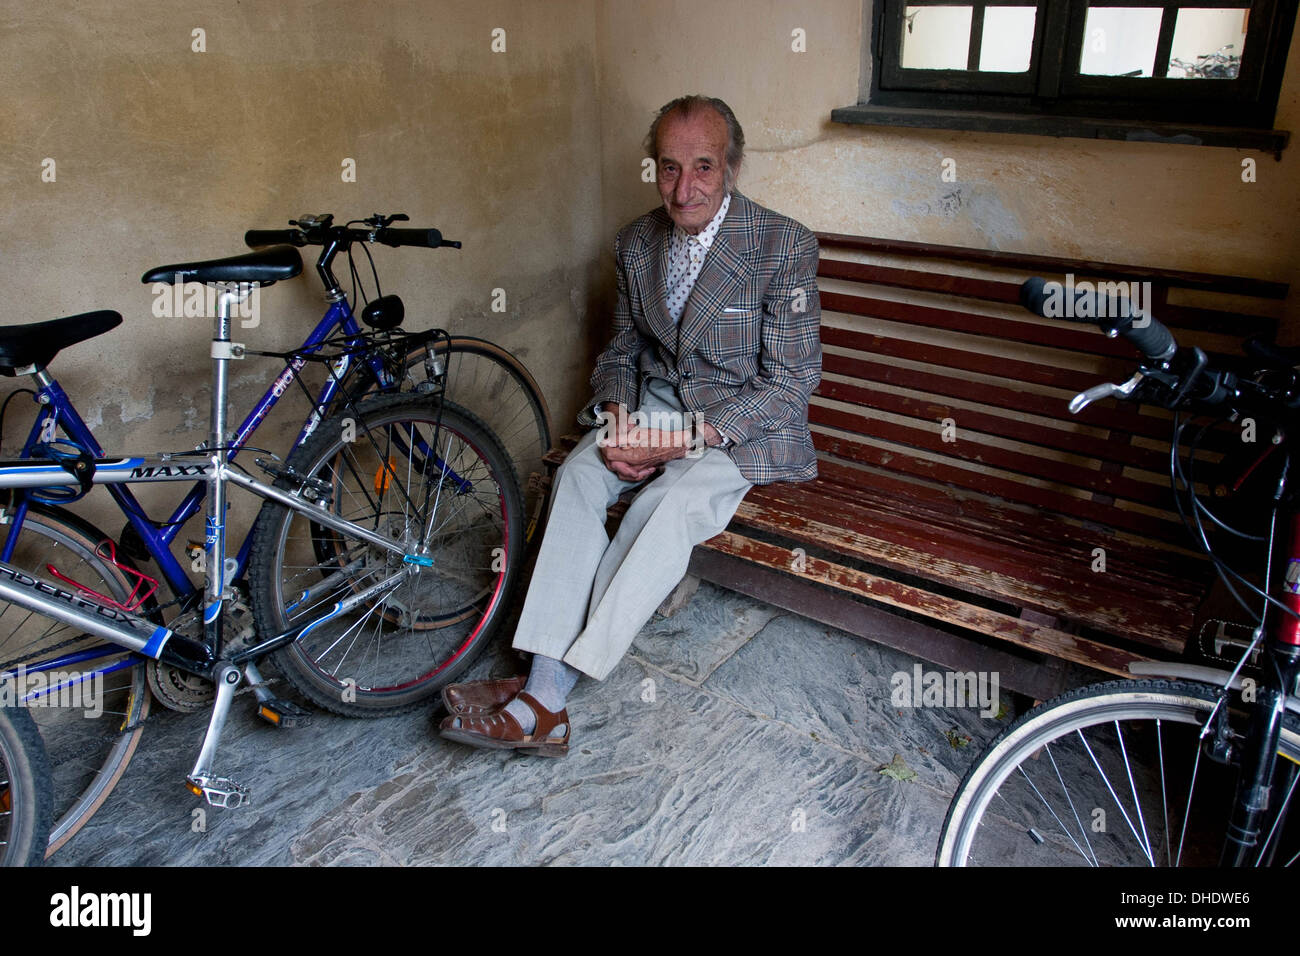 Old man bench alone Man sitting alone on a bench Czech Republic, Old man bike, bicycle sad expression, lonely Solitude, Old Age, Aging, Generation, older, Stock Photo